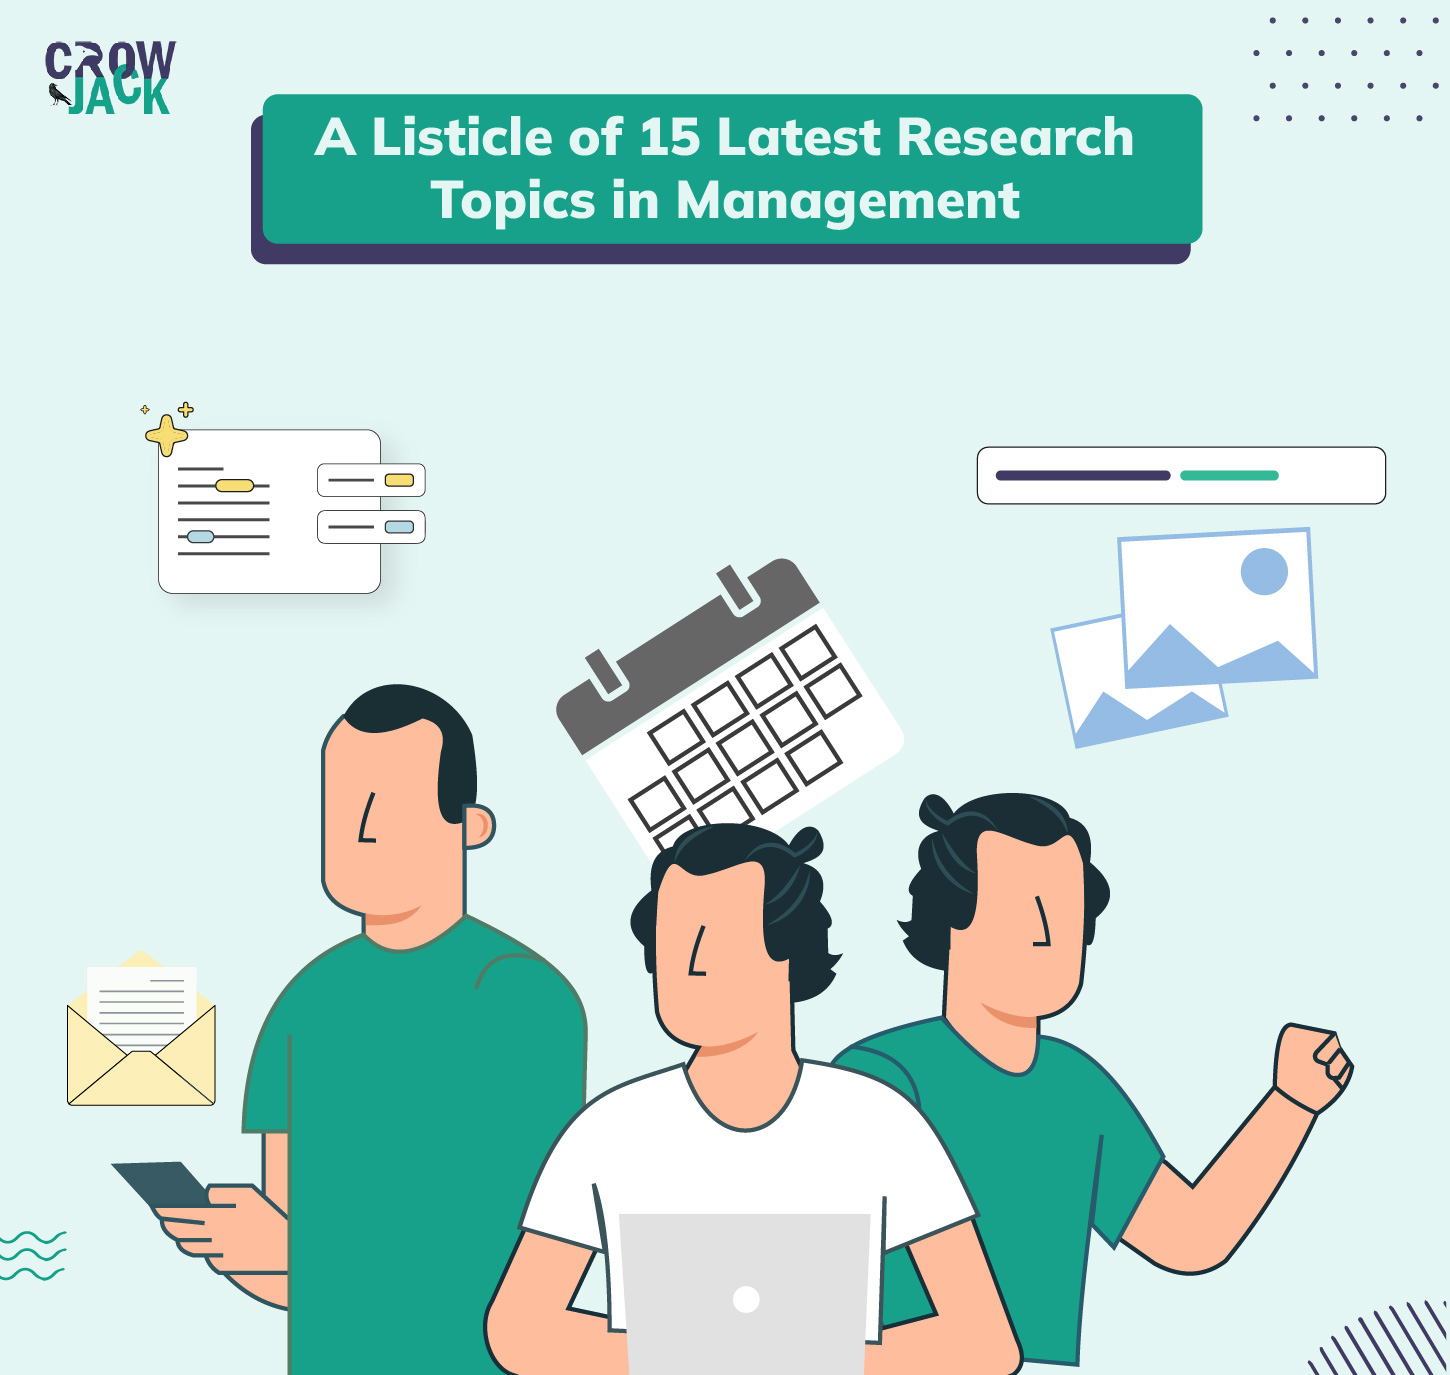 A Listicle of 15 Latest Research Topics in Management - Featured Image